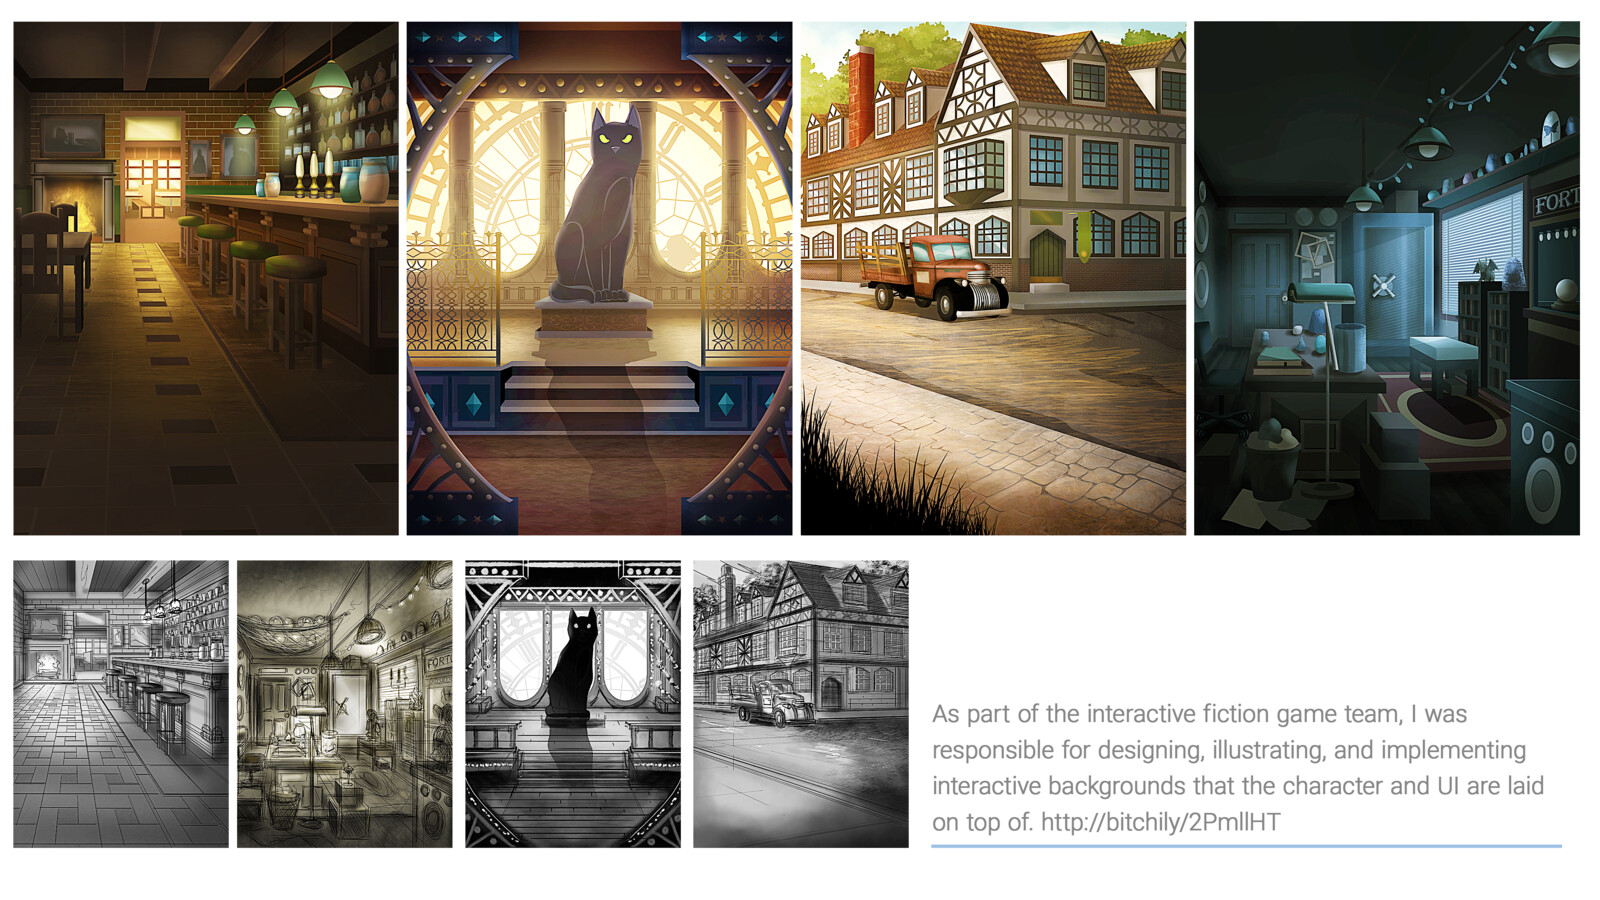 Interactive fiction background illustrations.